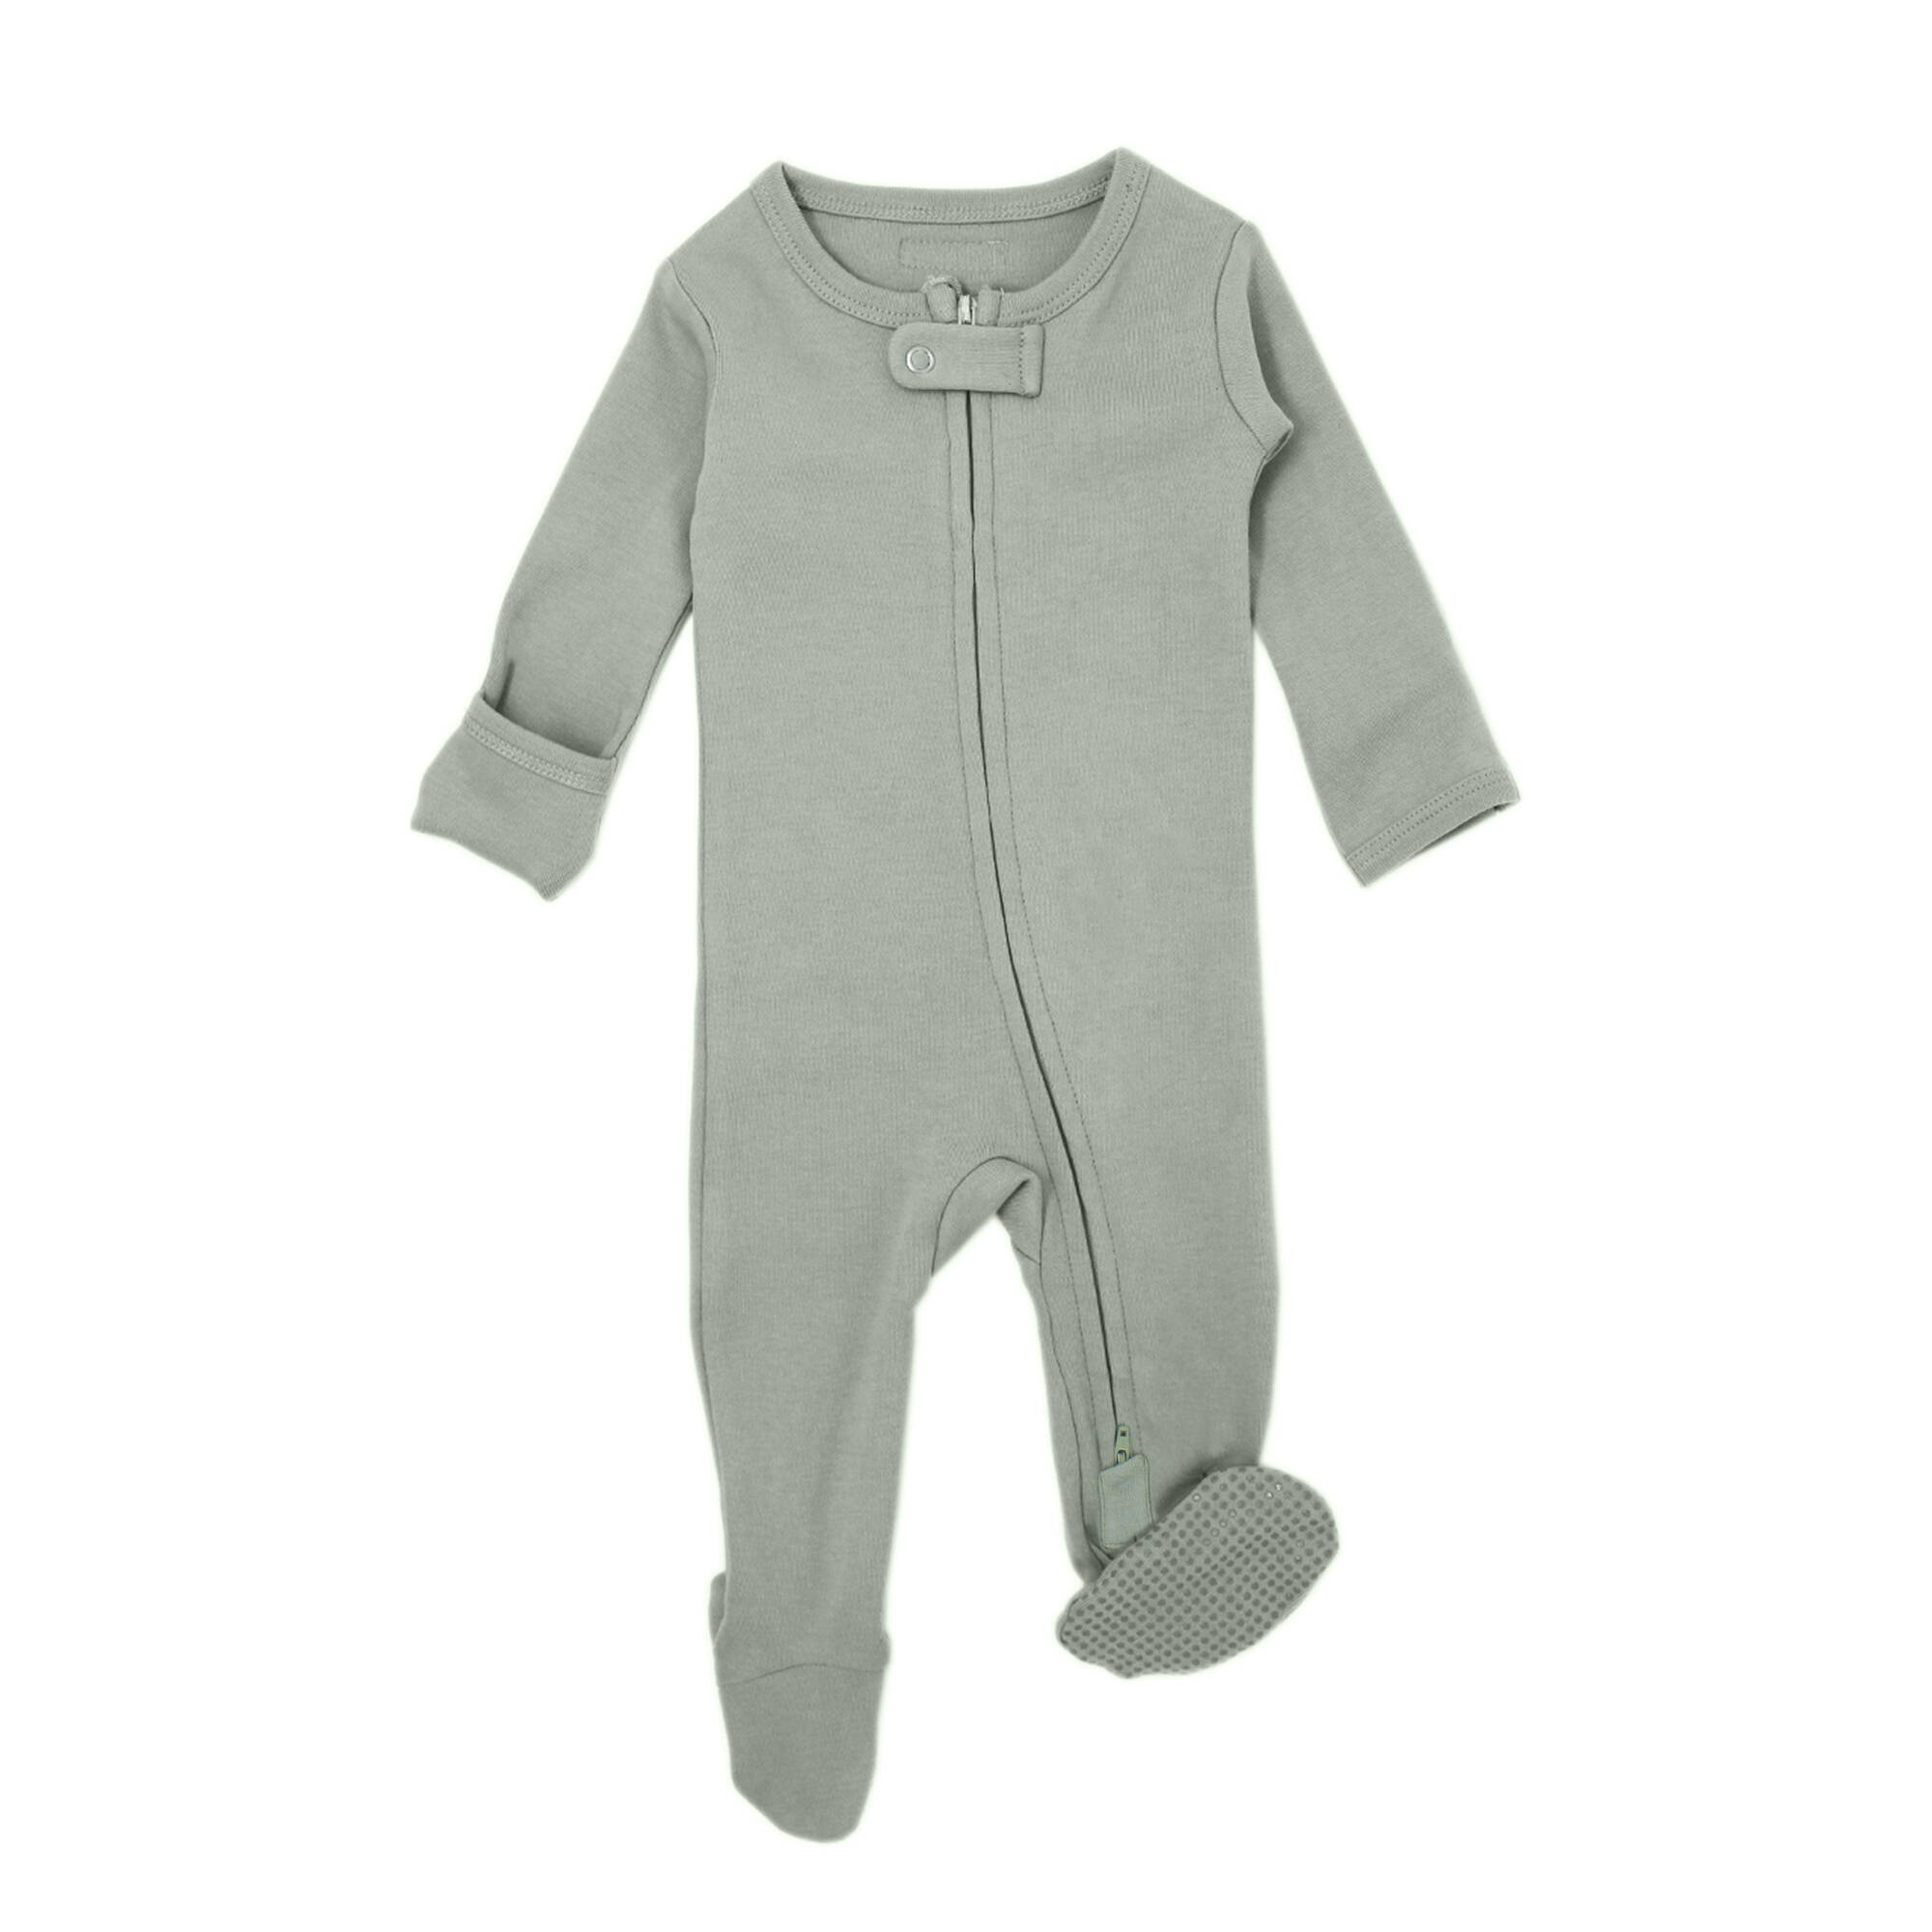 L\'ovedbaby Organic Zipper Footed Overall - Hazel Baby & Kids